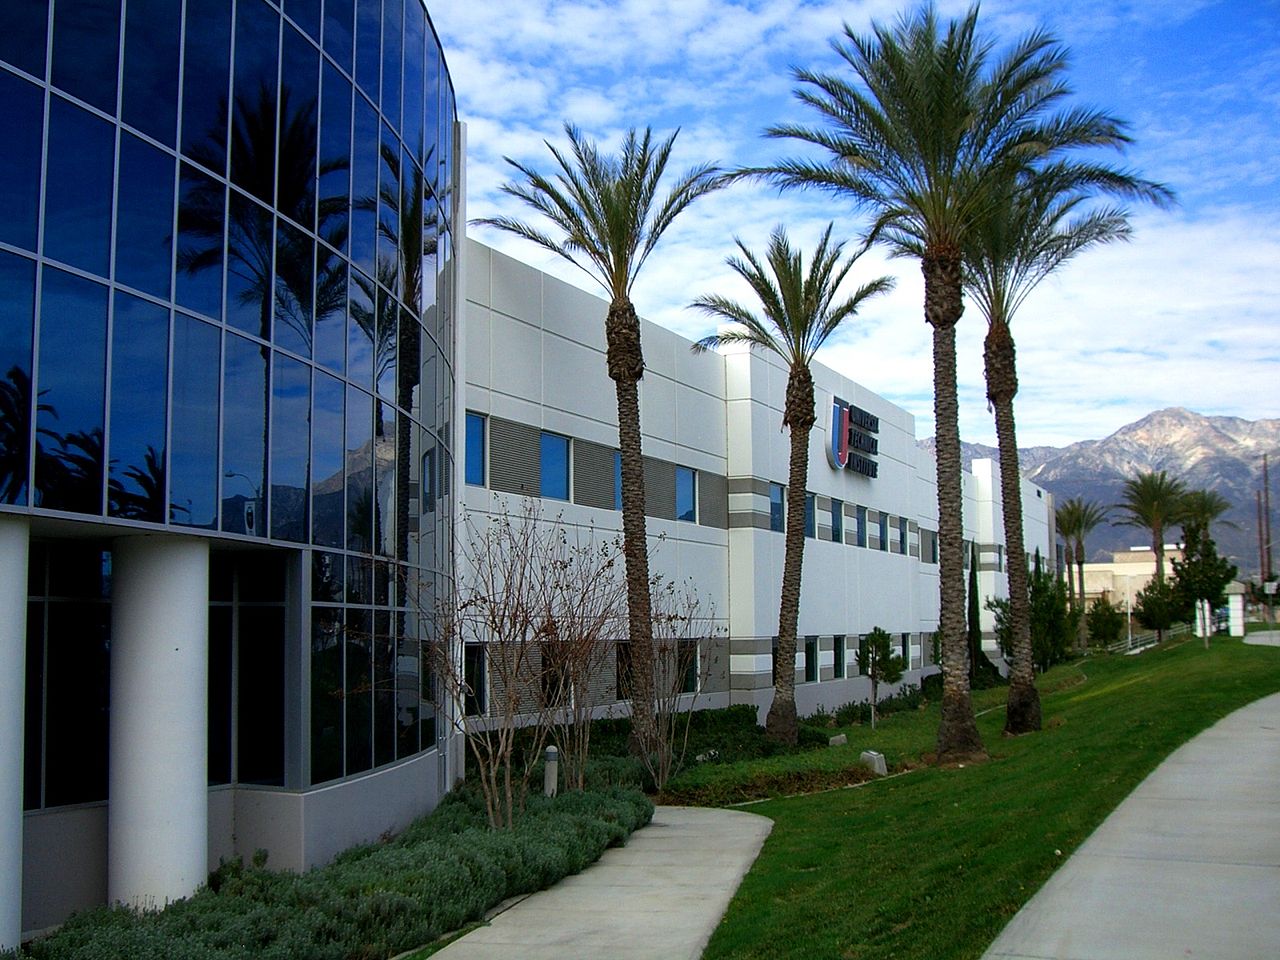 12-facts-about-educational-institutions-in-rancho-cucamonga-california